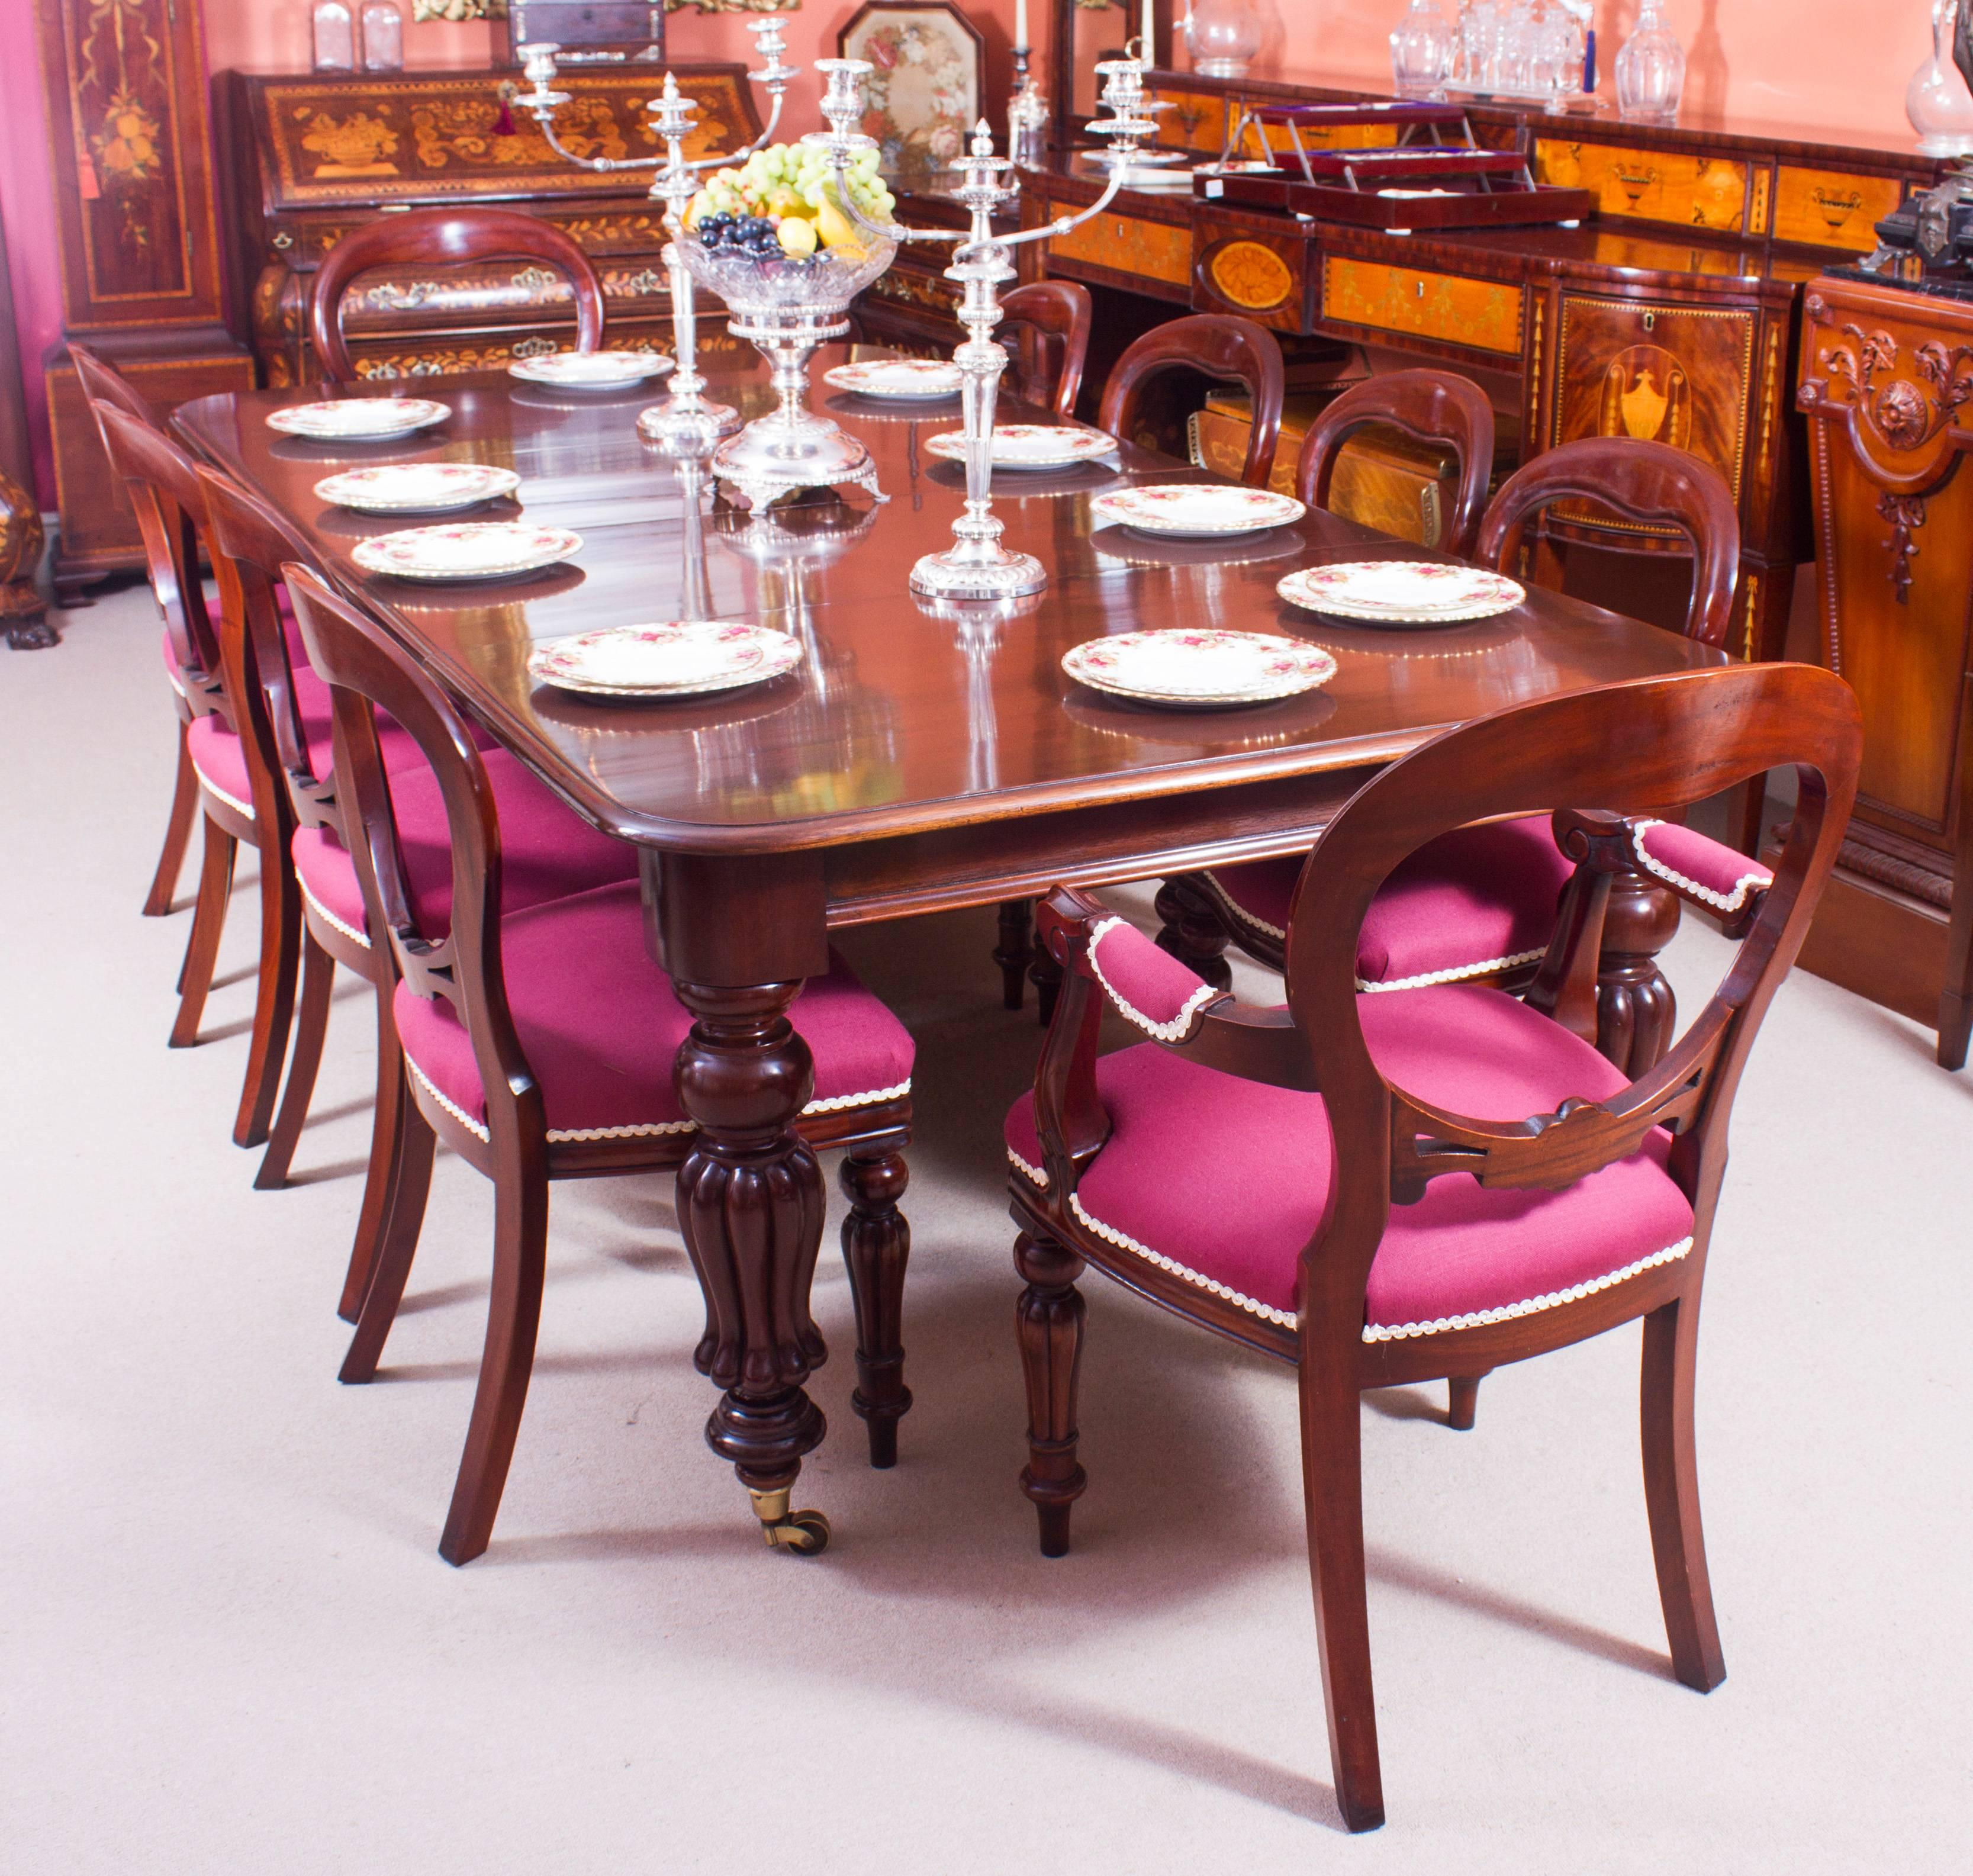 This is a magnificent antique 8ft Victorian solid mahogany wind out dining table which can seat ten diners in comfort, circa 1860 in date.

This beautiful table is in stunning flame mahogany and has two leaves of fifty cm each, which can be added